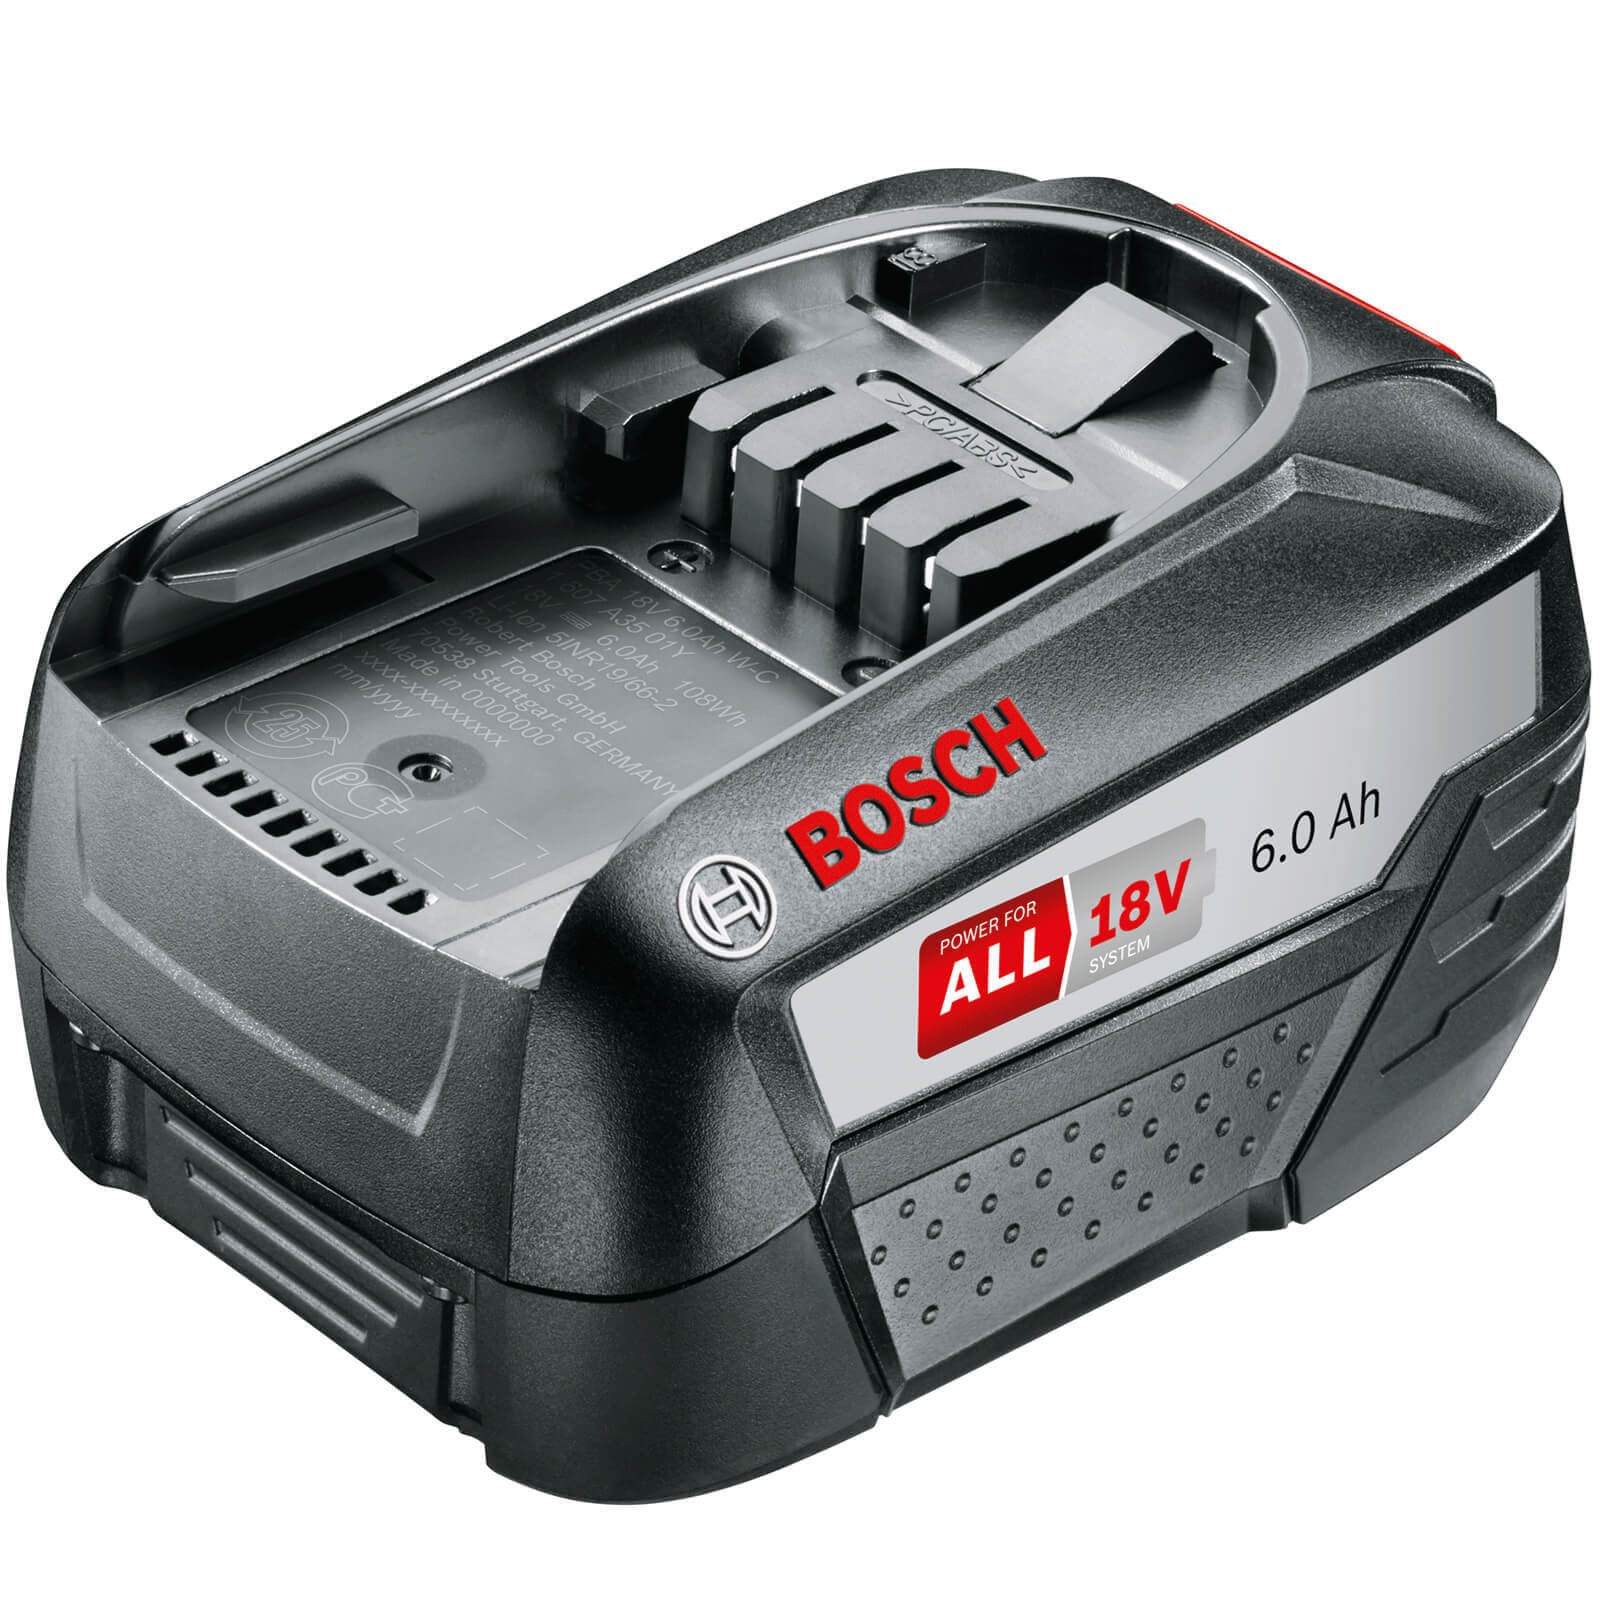 Compatible for All Tools in 12 V Power for All System Bosch 12 V 2.5 Ah Lithium-Ion Battery